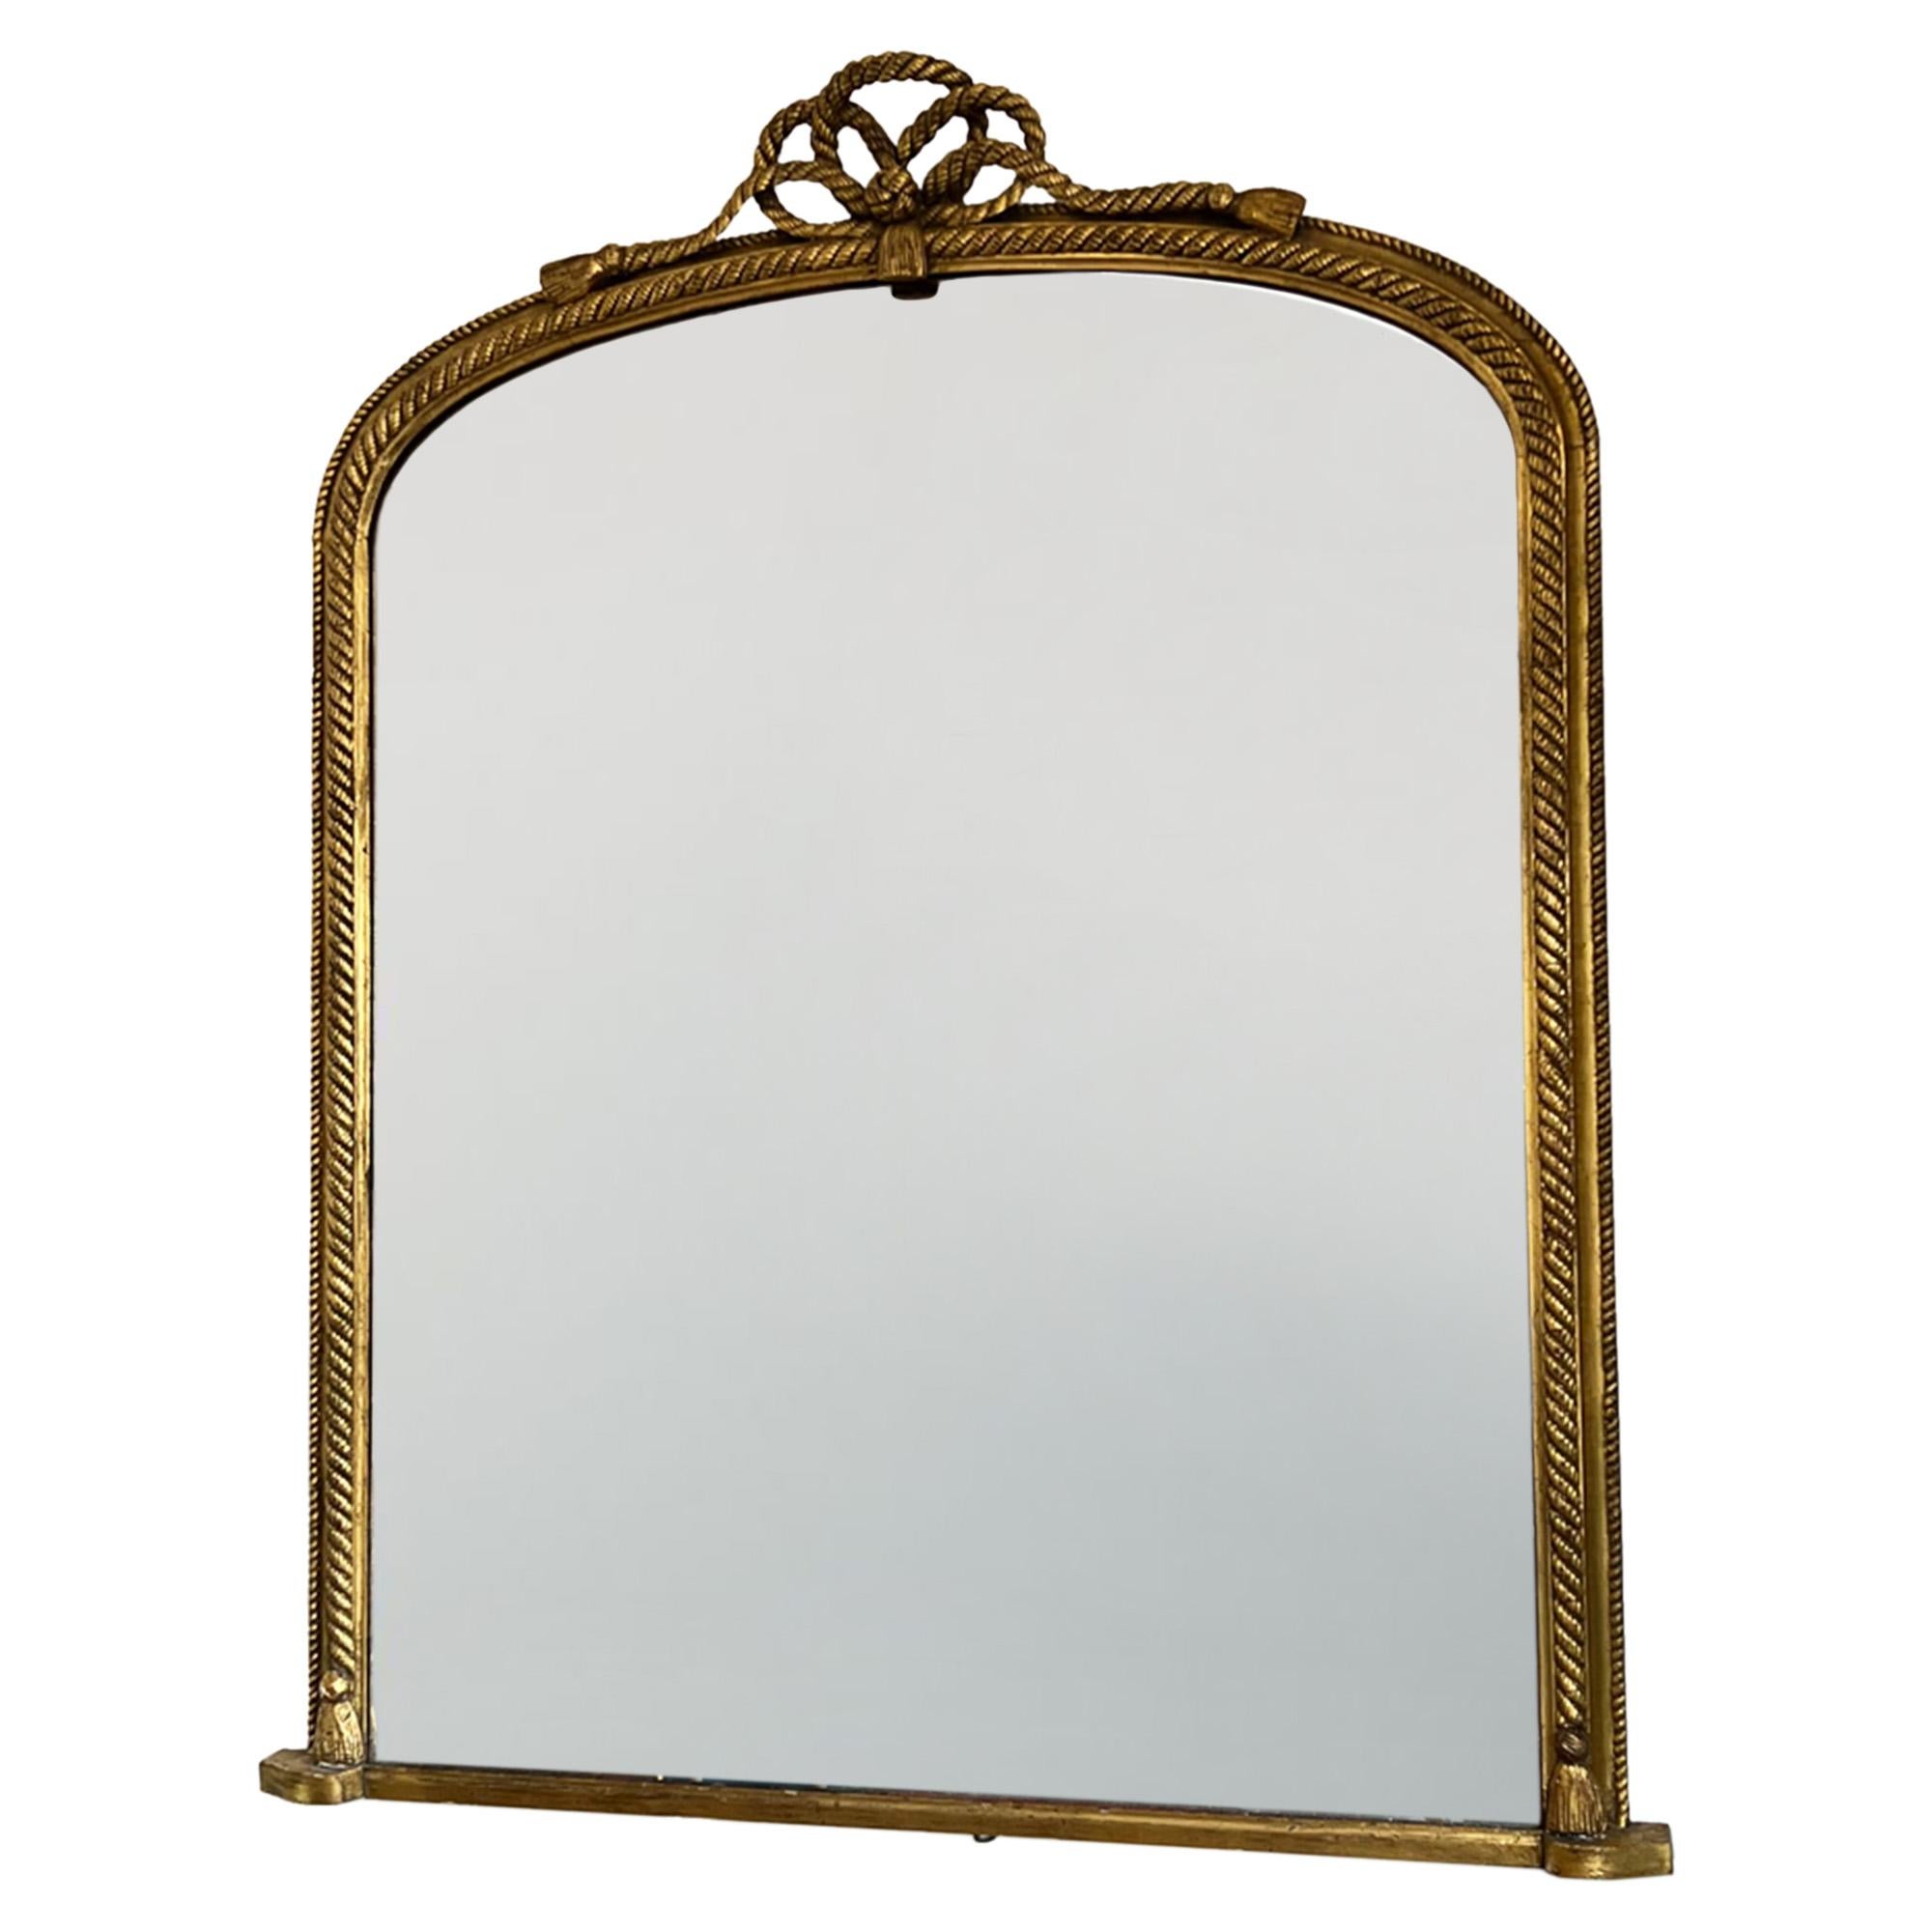 This is a gorgeous giltwood overmantle mirror with the original plate - beautiful mercury glass.

Made in France in the 19th century and it’s big! The lovely rope detail makes this piece really decorative, without being too fussy. 

A great